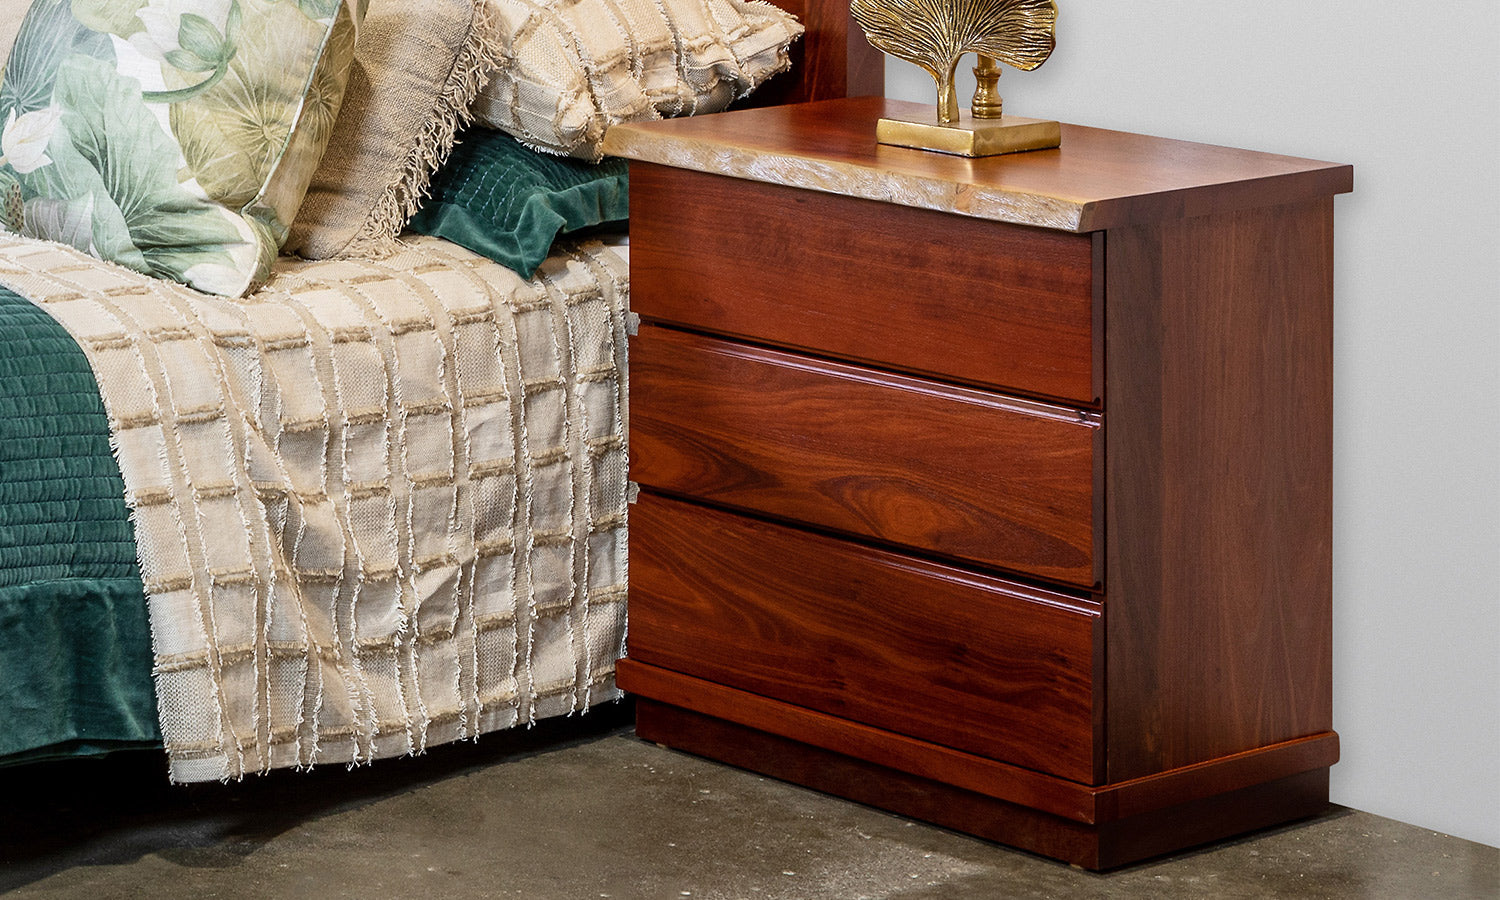 Naturaliste Natural Edge Jarrah or Marri Timber Wood Bedside Tables with drawers - Perth WA